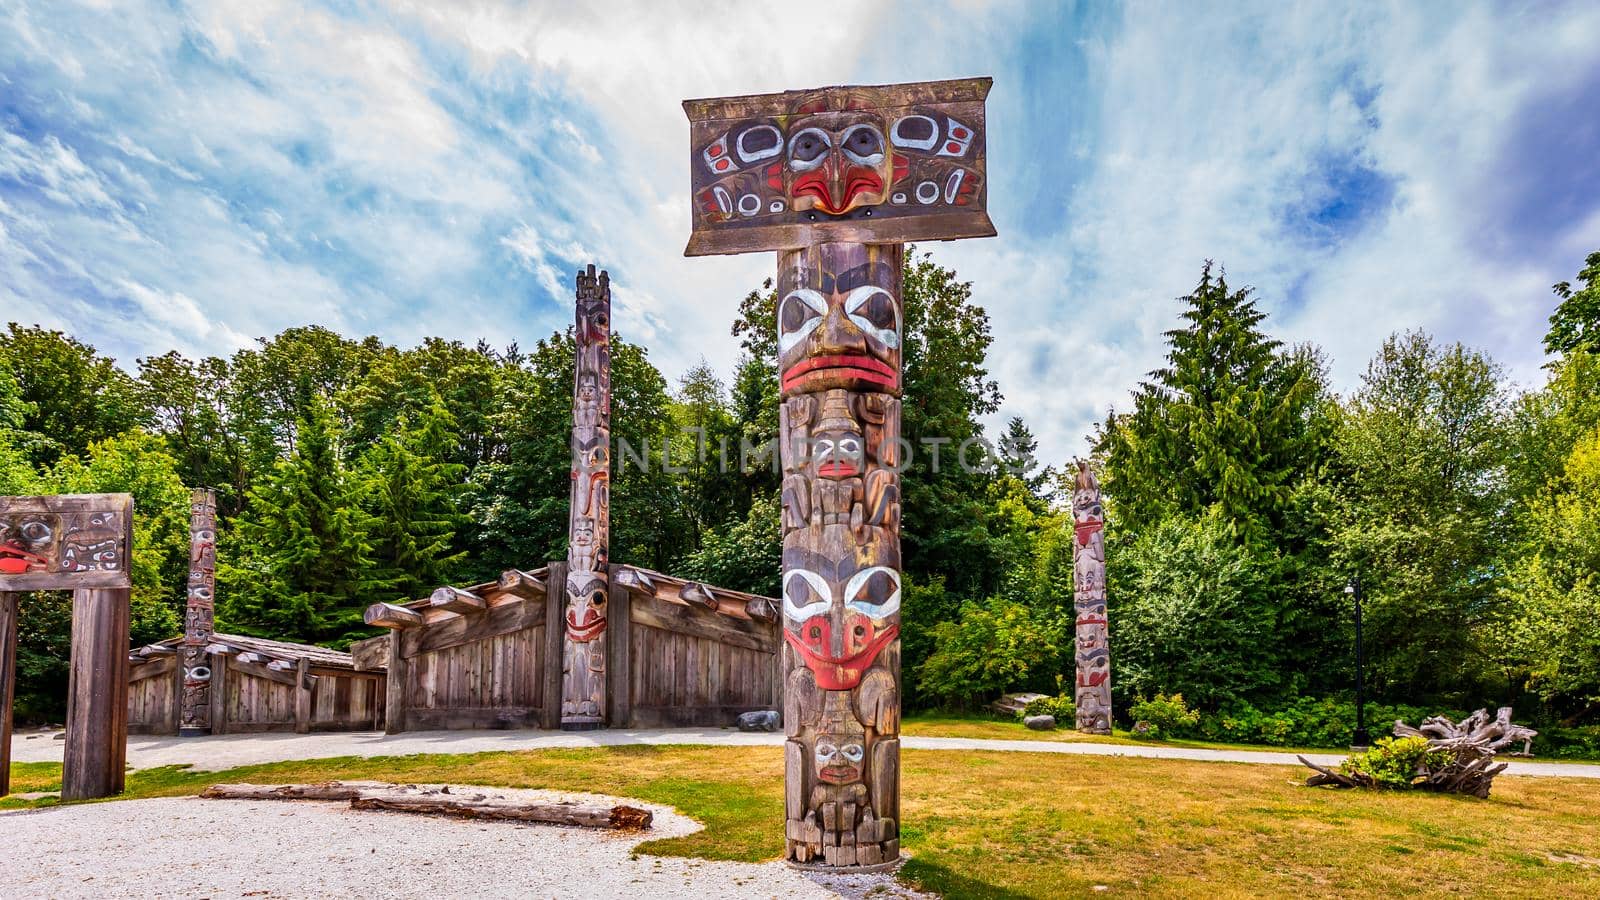 Vancouver, British Columbia, Canada - July 6, 2018: First Nations totem poles and Haida houses in Museum of Anthropogy at UBC